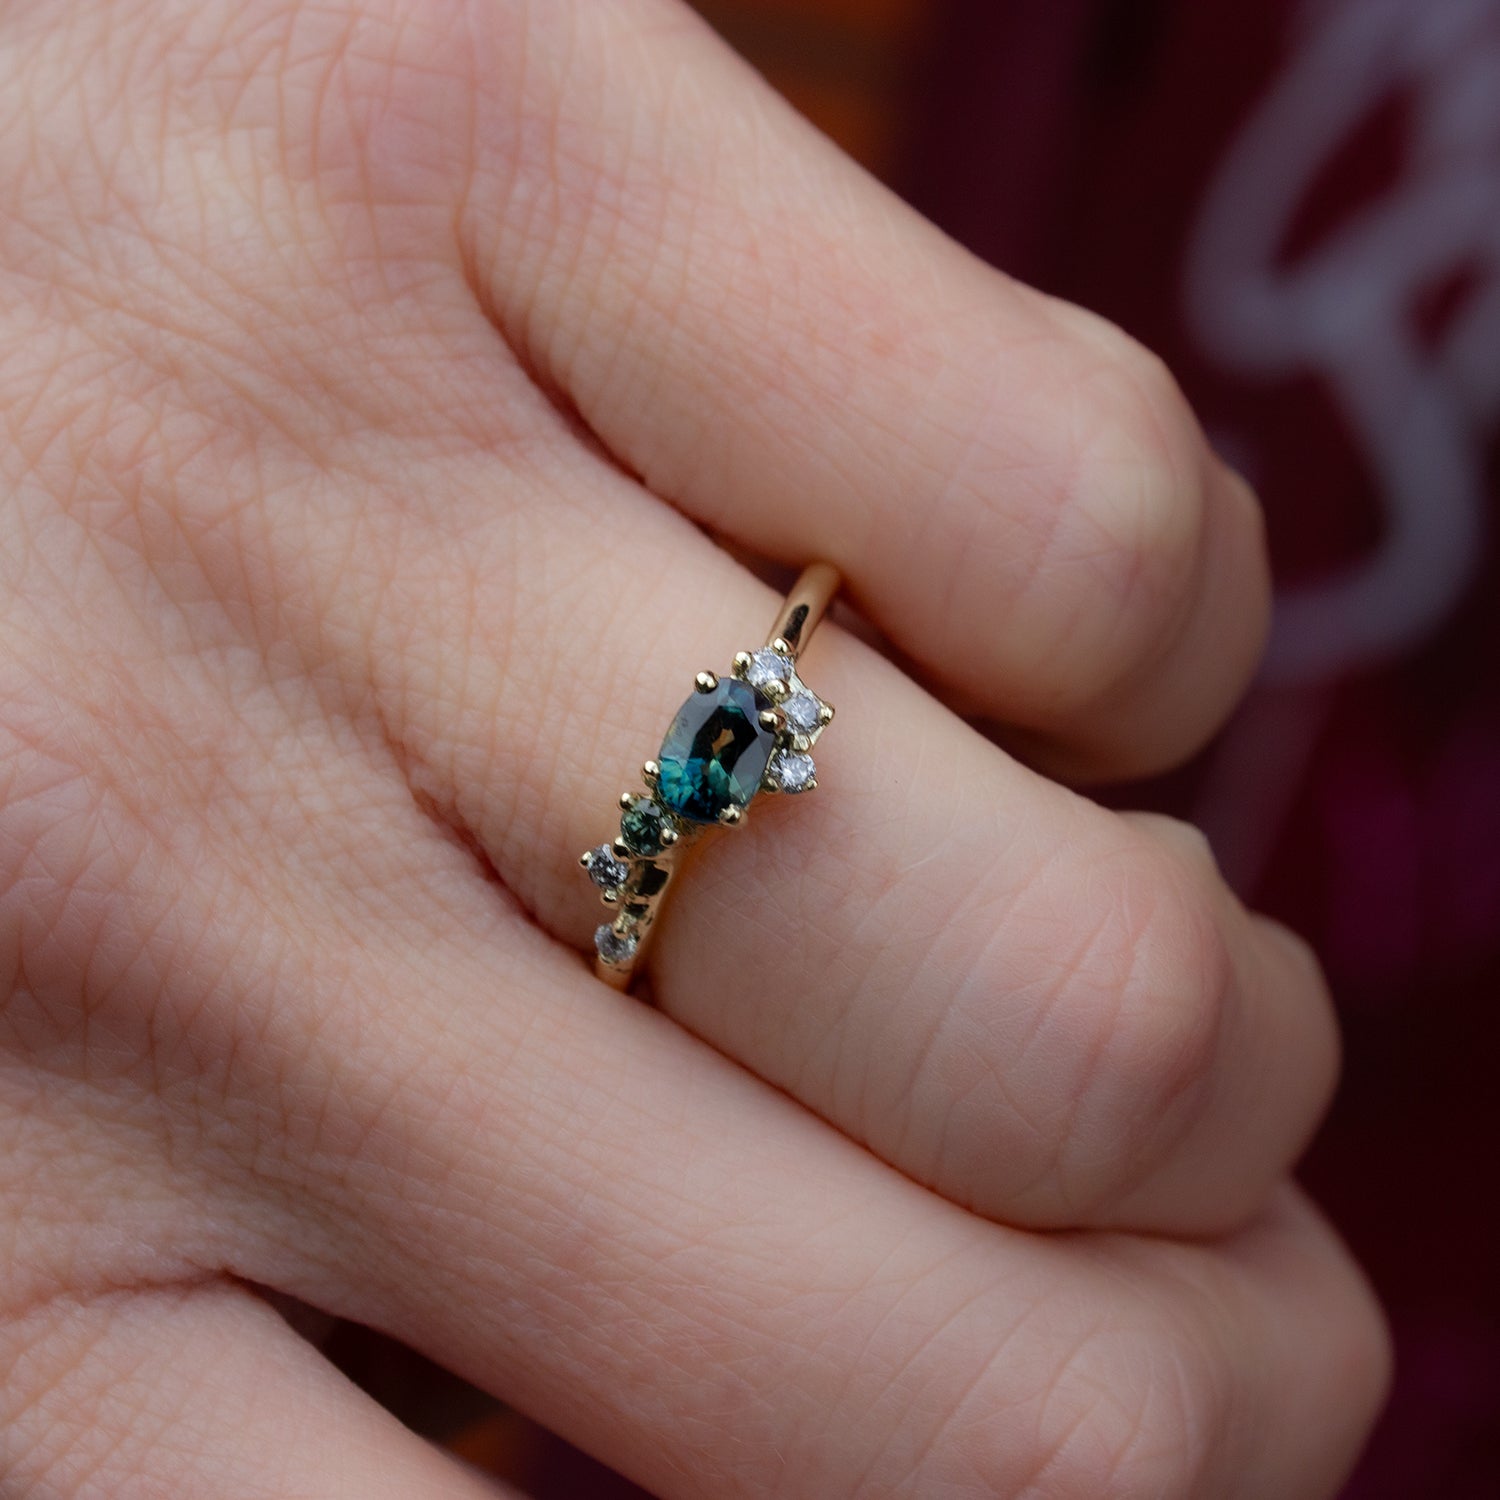 Alternative engagement ring featuring central green parti sapphire, smaller green sapphire and salt and pepper diamonds scattered organically along the band.